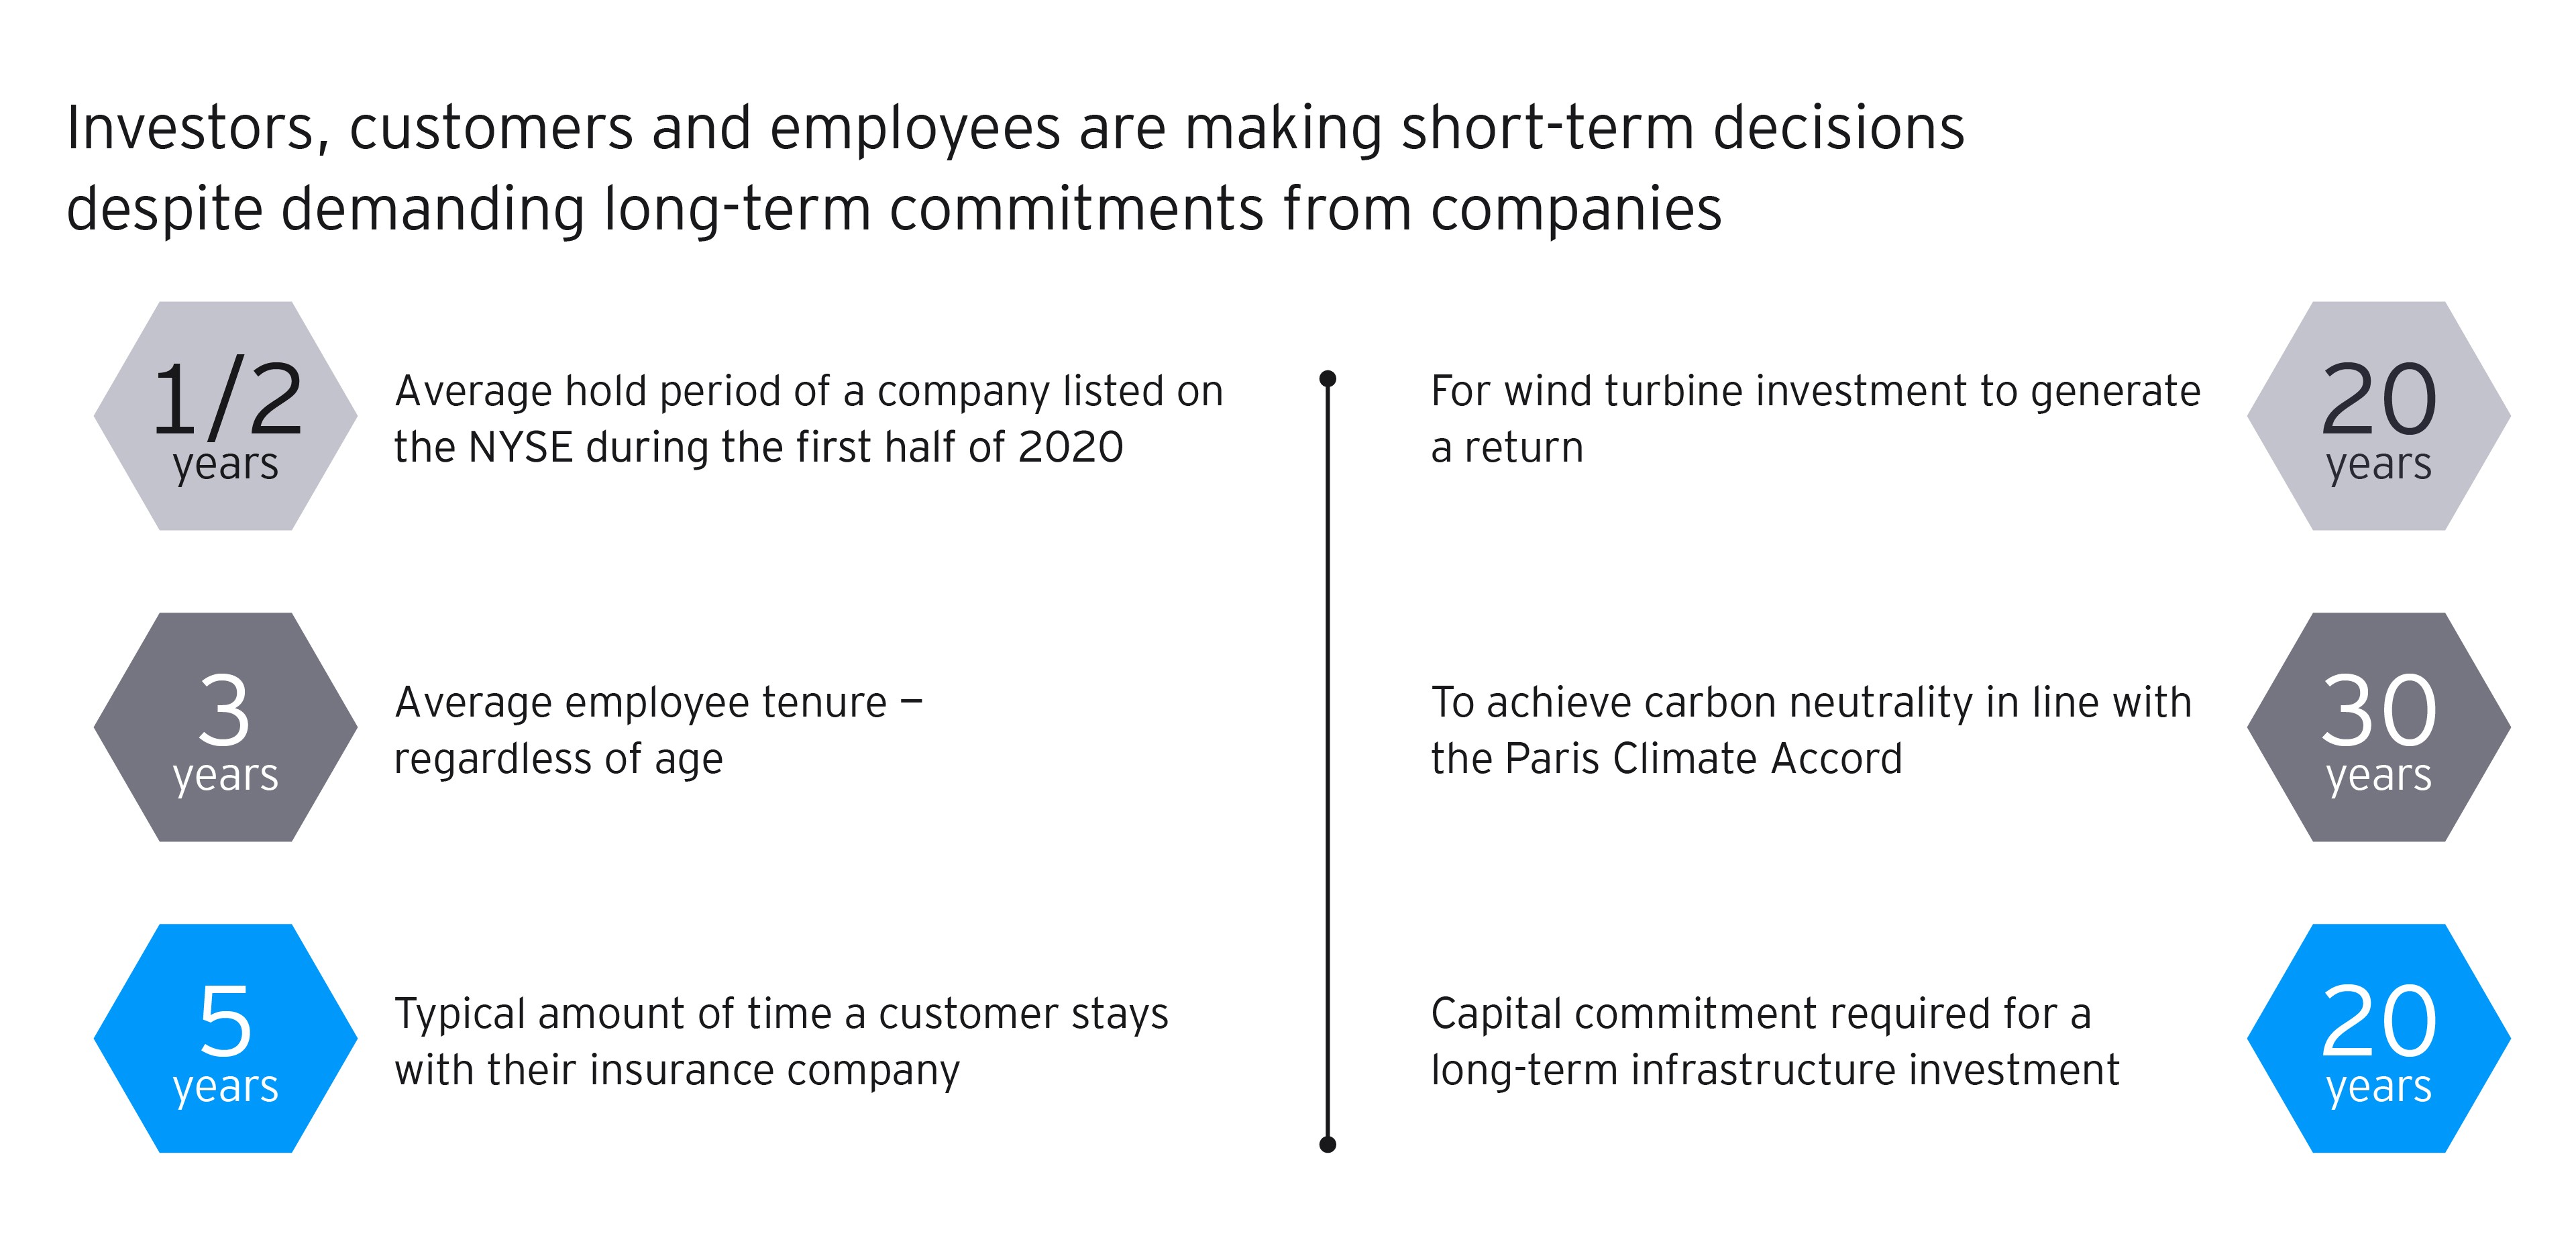 Investors customers and employees making short-term decisions